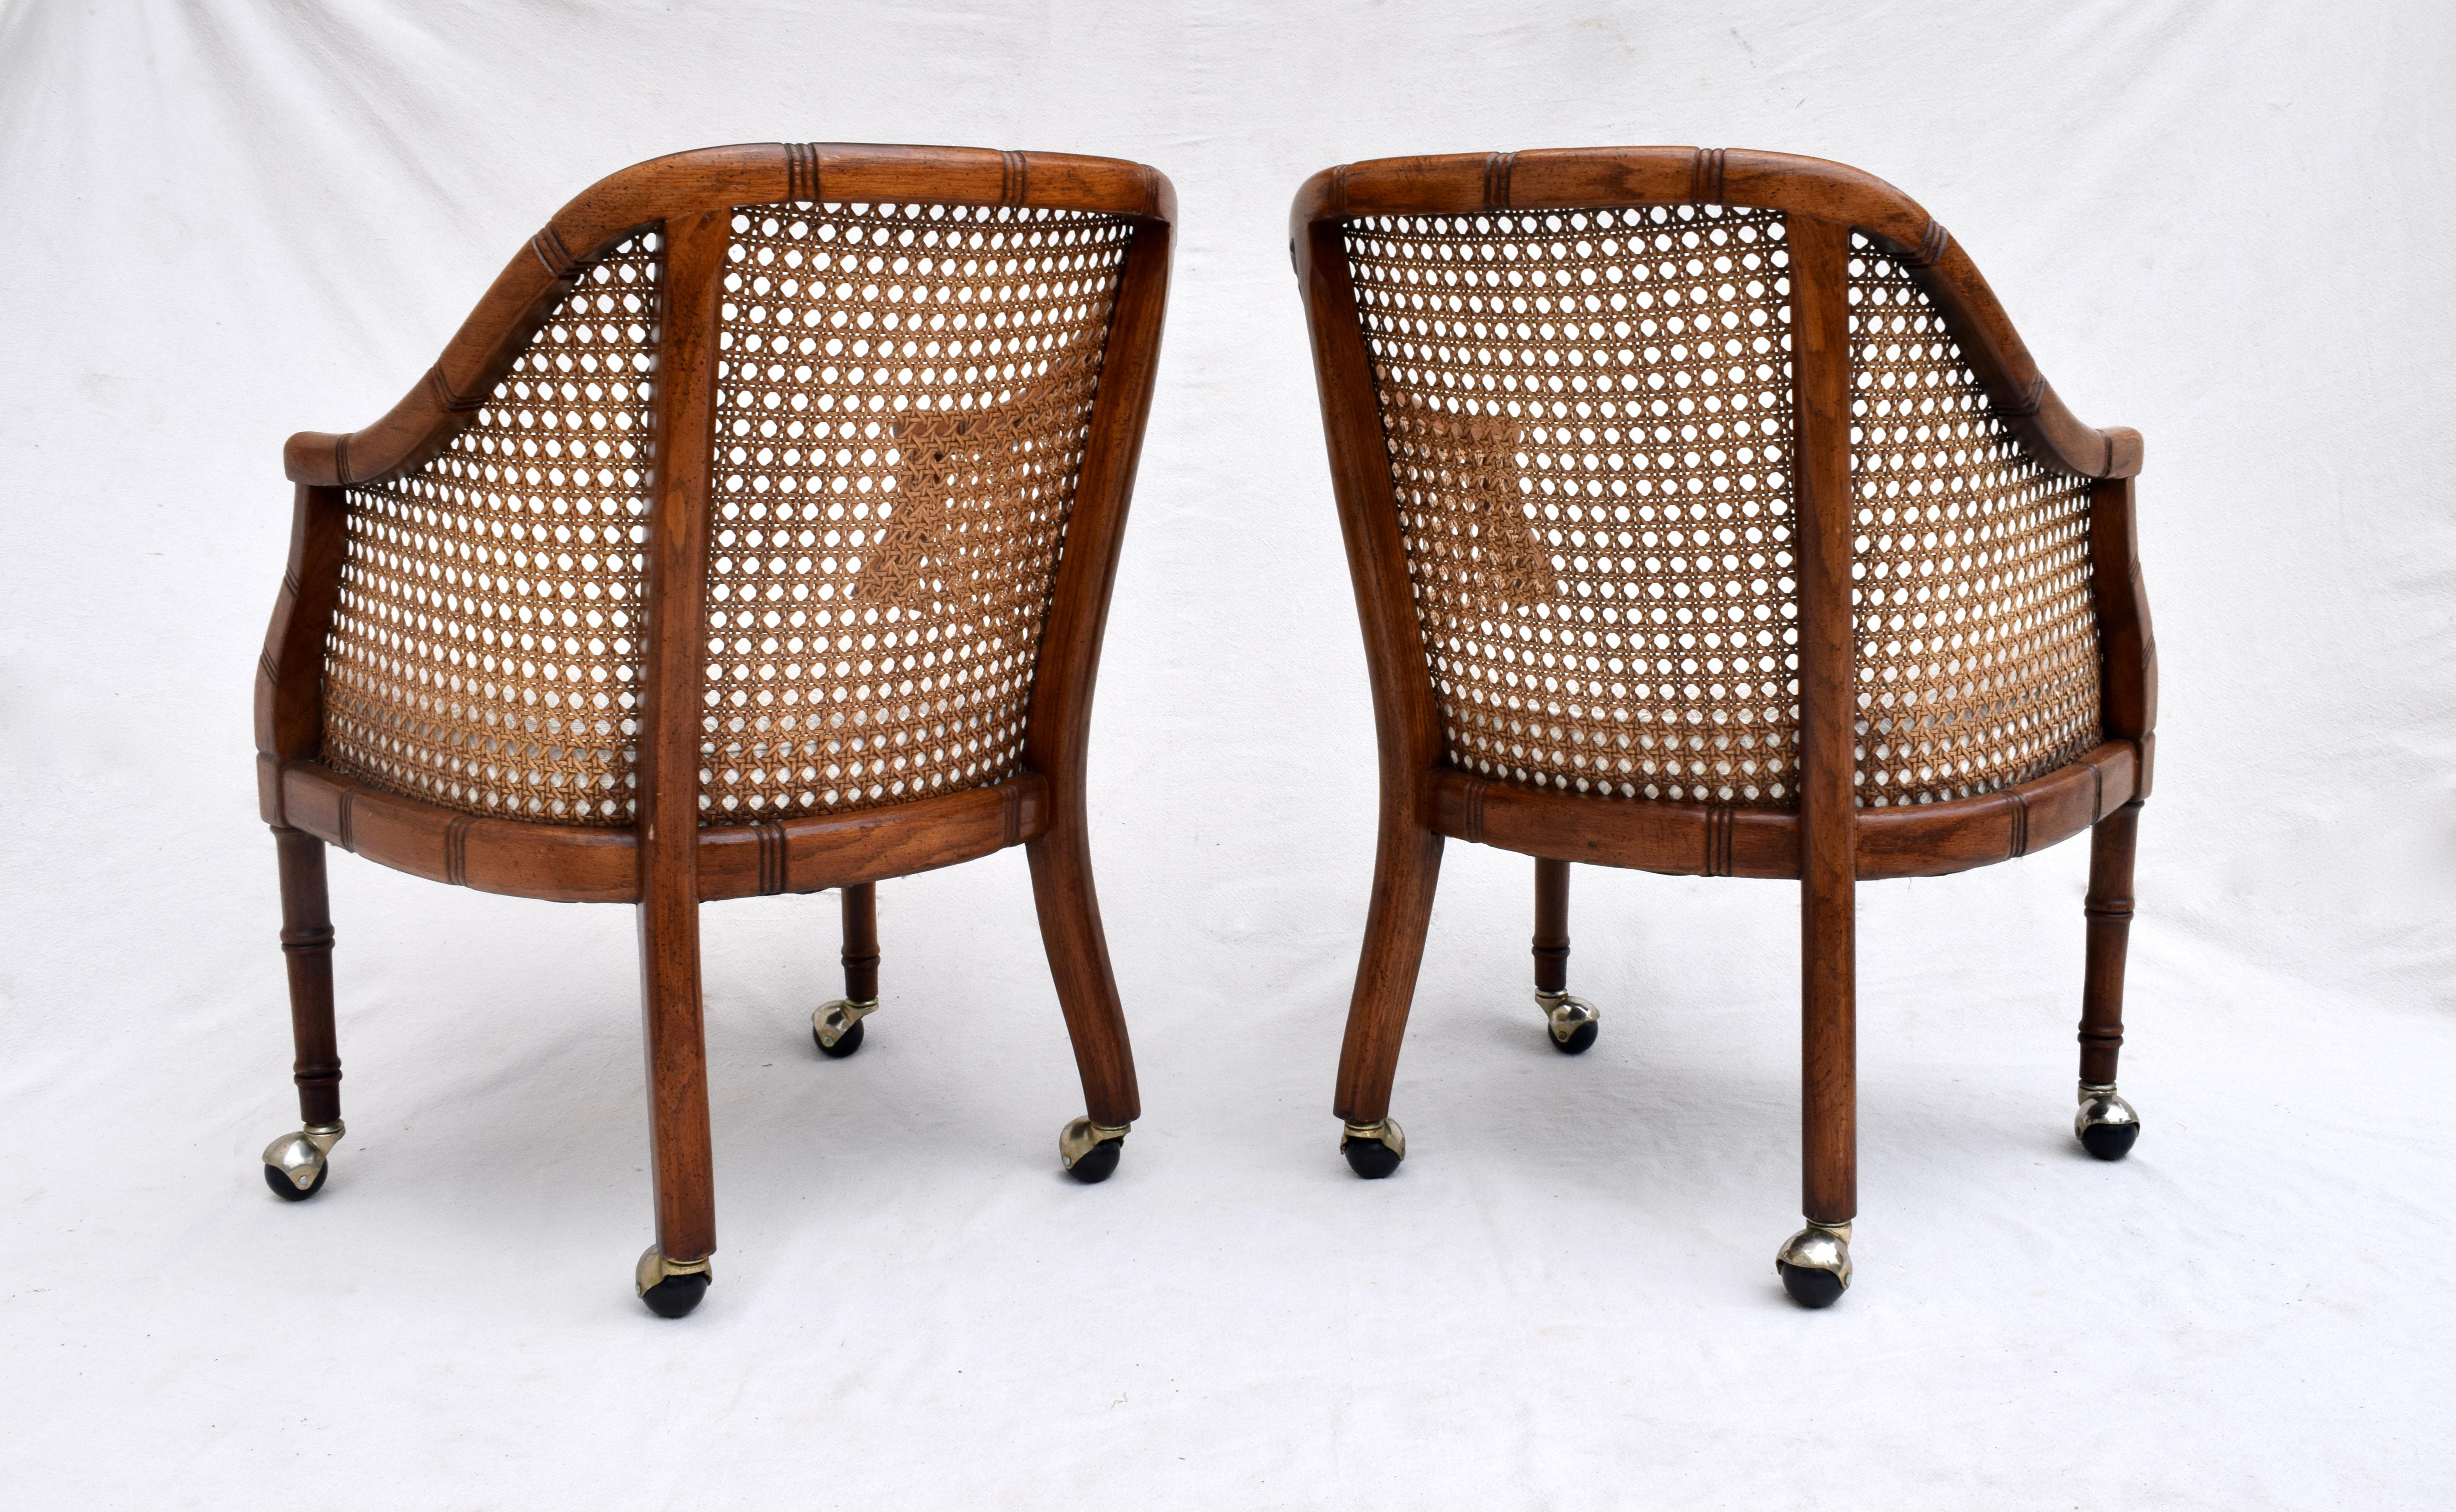 20th Century Set of Four Caned Barrel Chairs on Casters